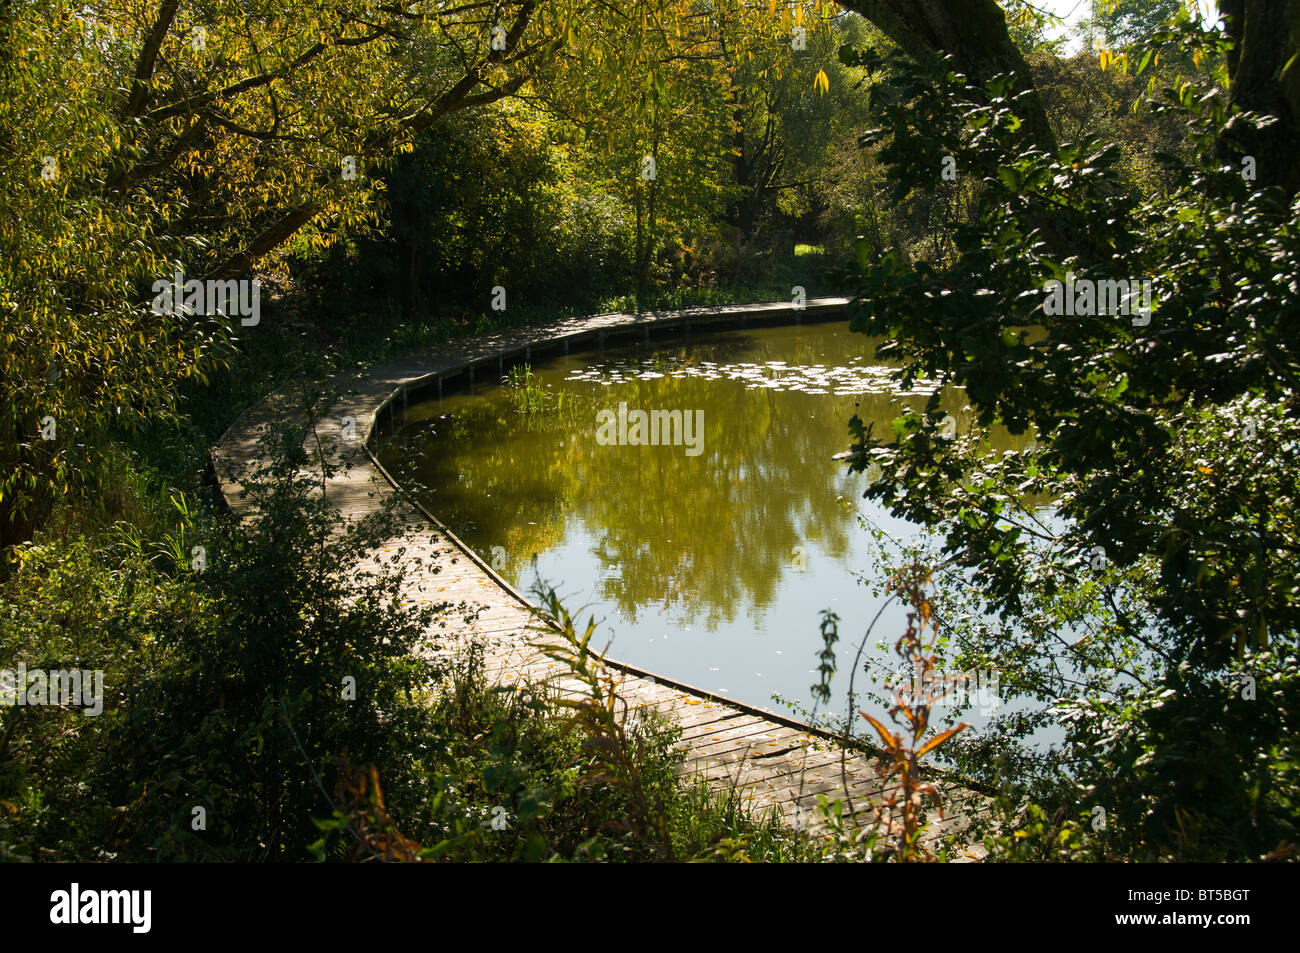 Fishing pool at Daisy Nook Country Park, Failsworth, Manchester, UK Stock Photo